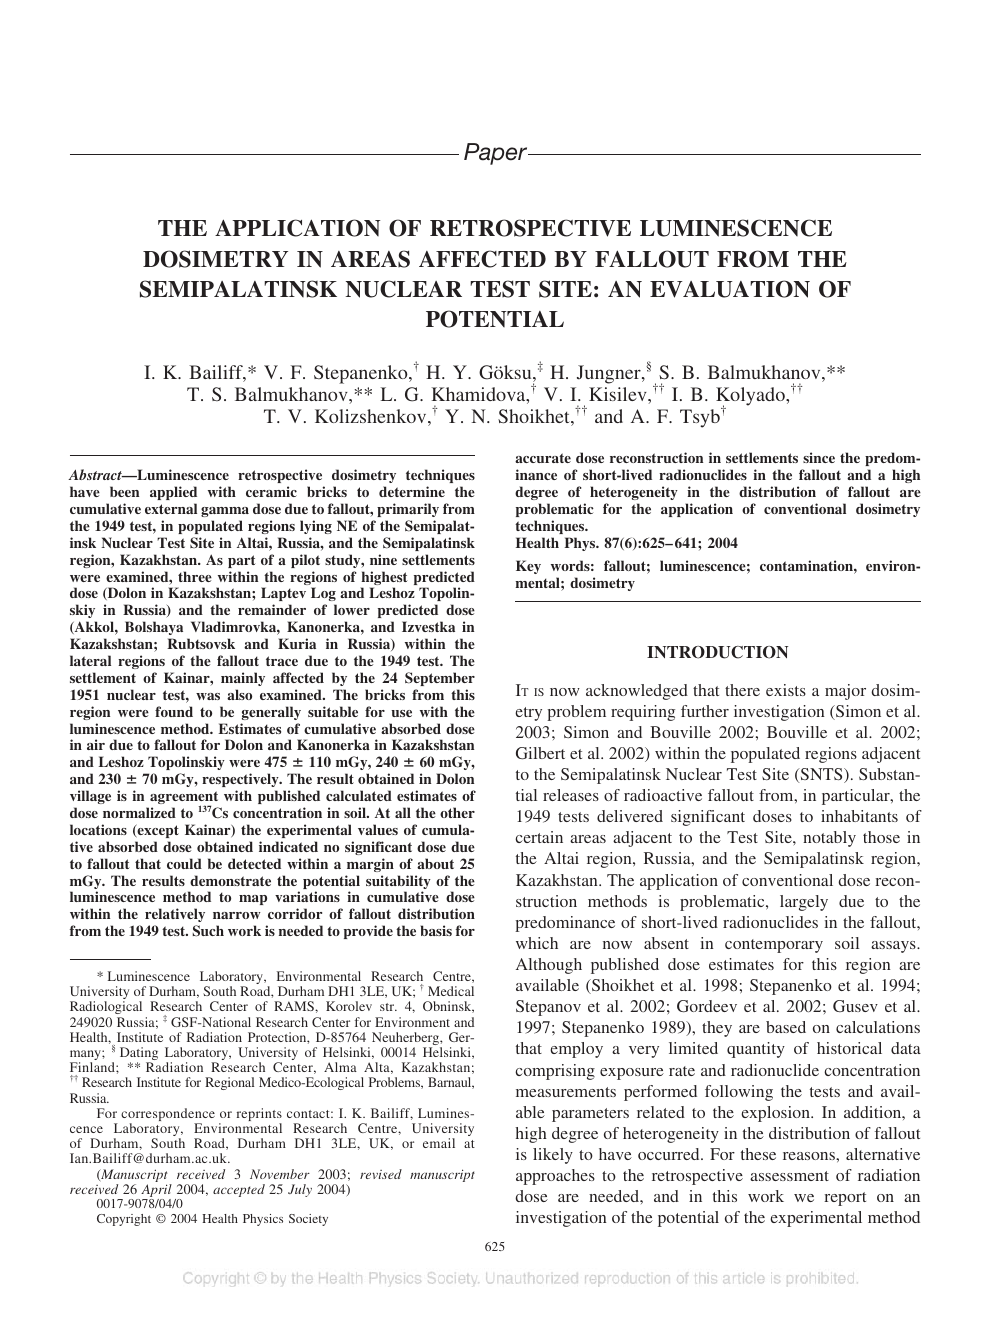 The Application Of Retrospective Luminescence Dosimetry In Areas Affected By Fallout From The Semipalatinsk Nuclear Test Site An Evaluation Of Potential Topic Of Research Paper In History And Archaeology Download Scholarly